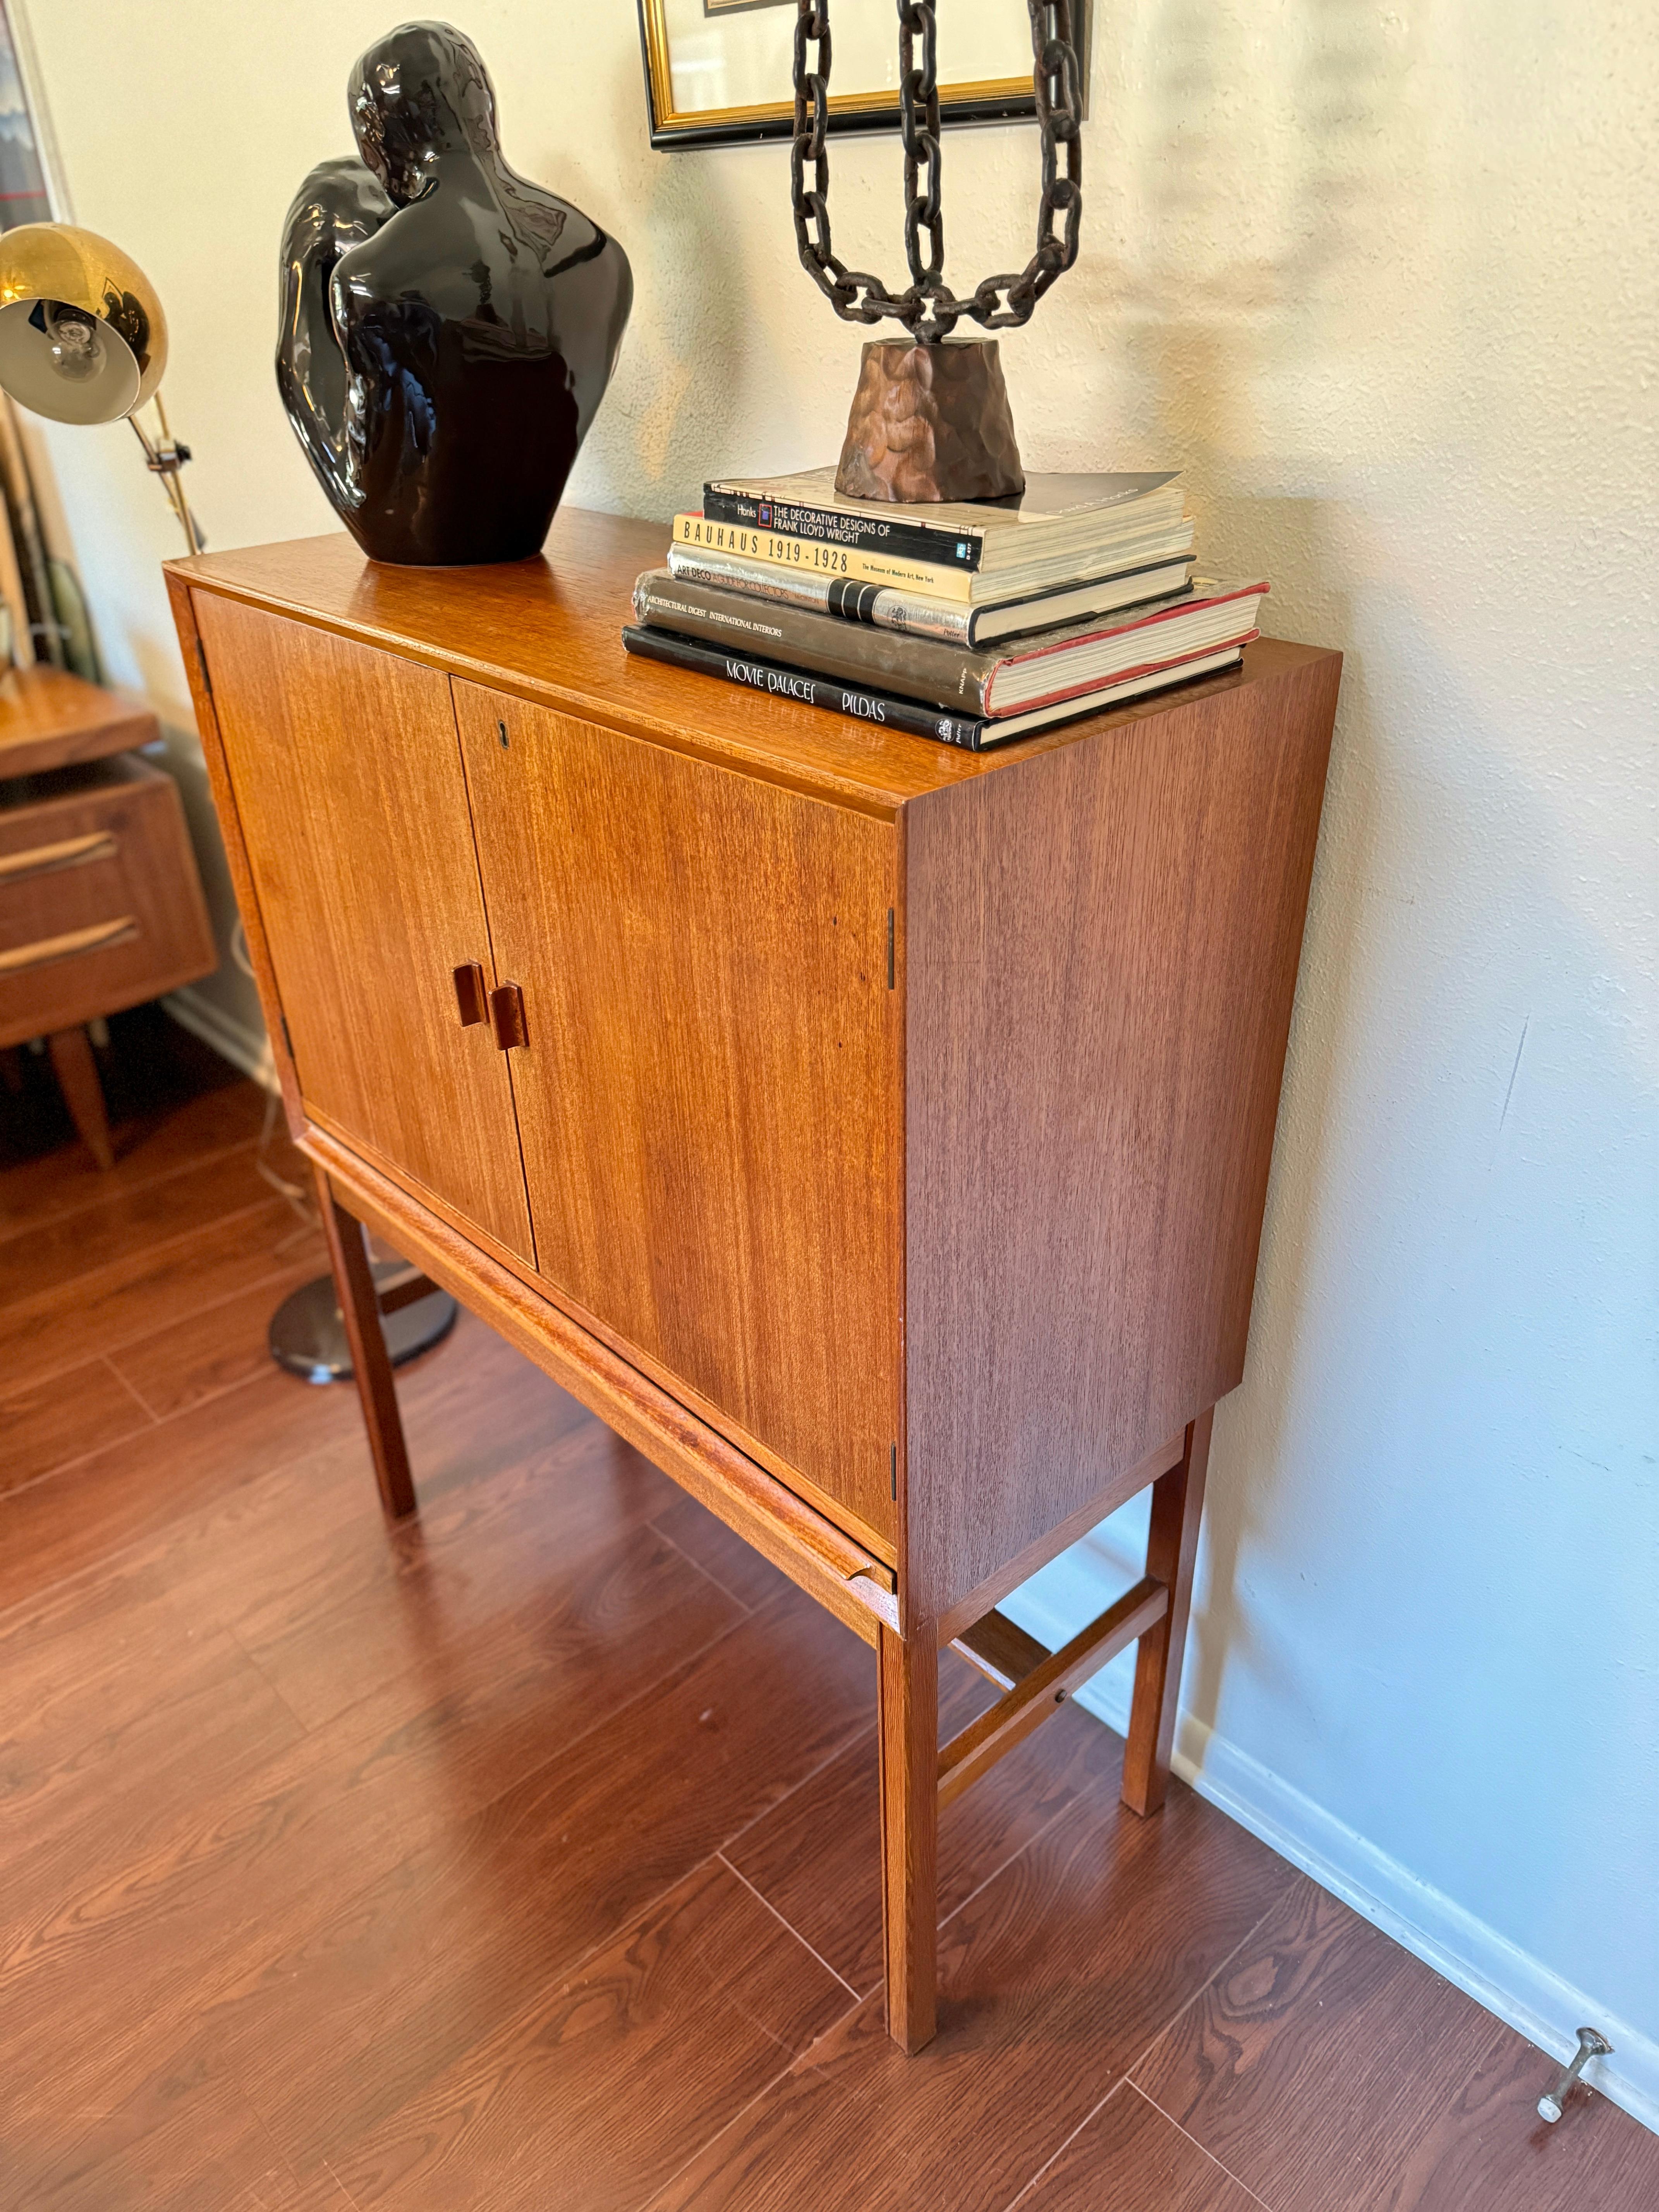 Wood A rare mid century modern tall bar cabinet with a pull out surface For Sale